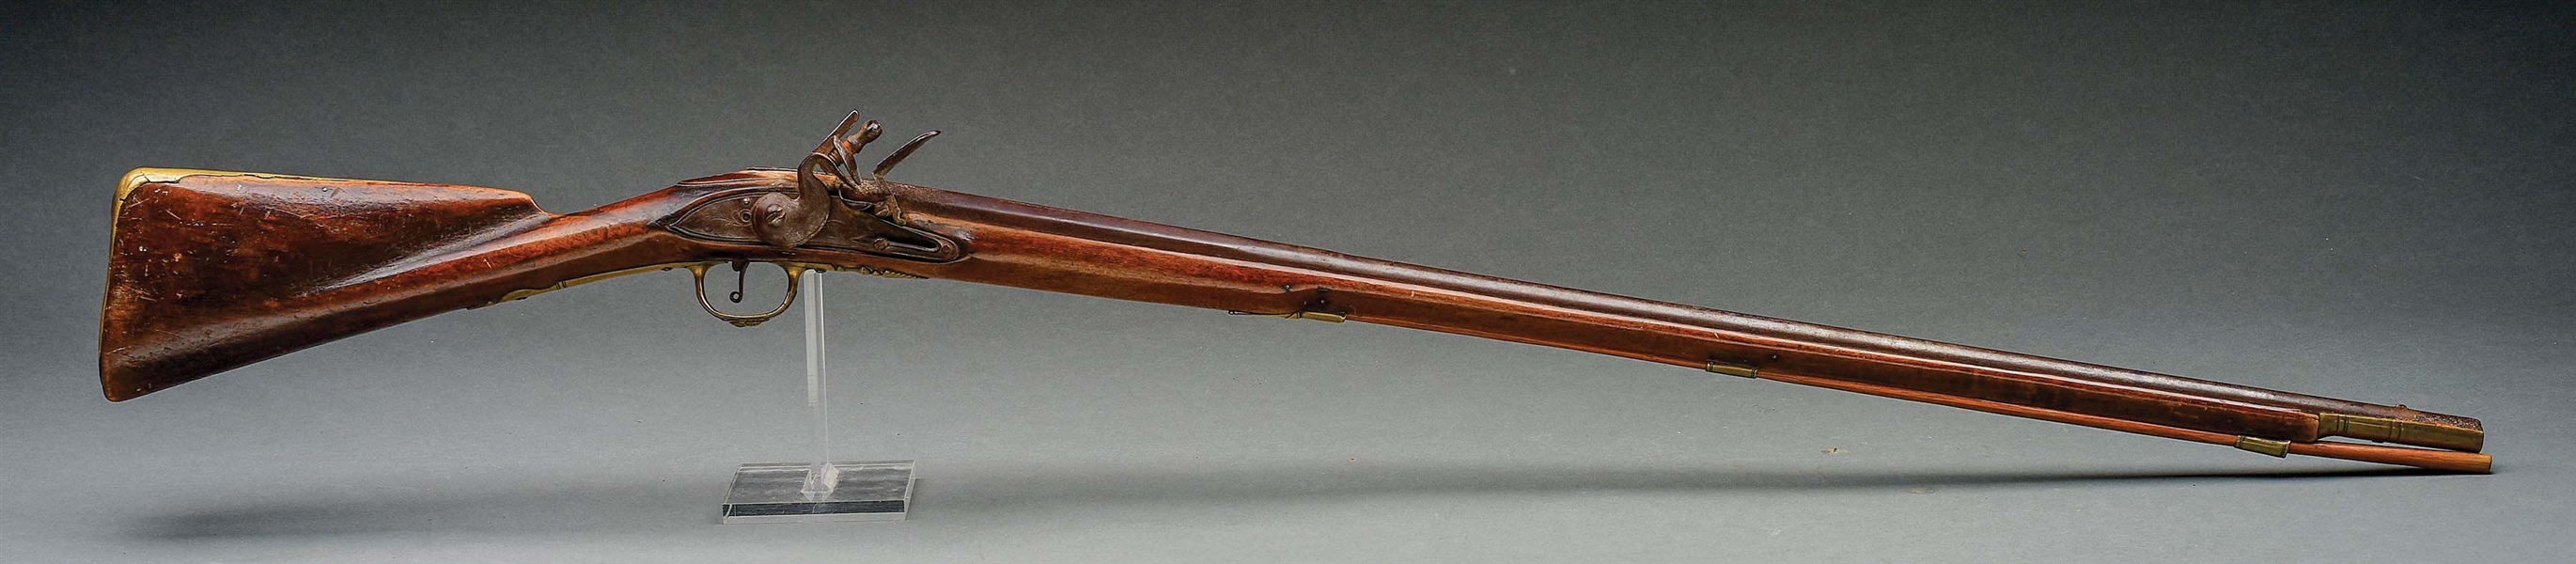 (A) RARE AND EARLY MASSACHUSETTS ATTRIBUTED FLINTLOCK FUSIL.